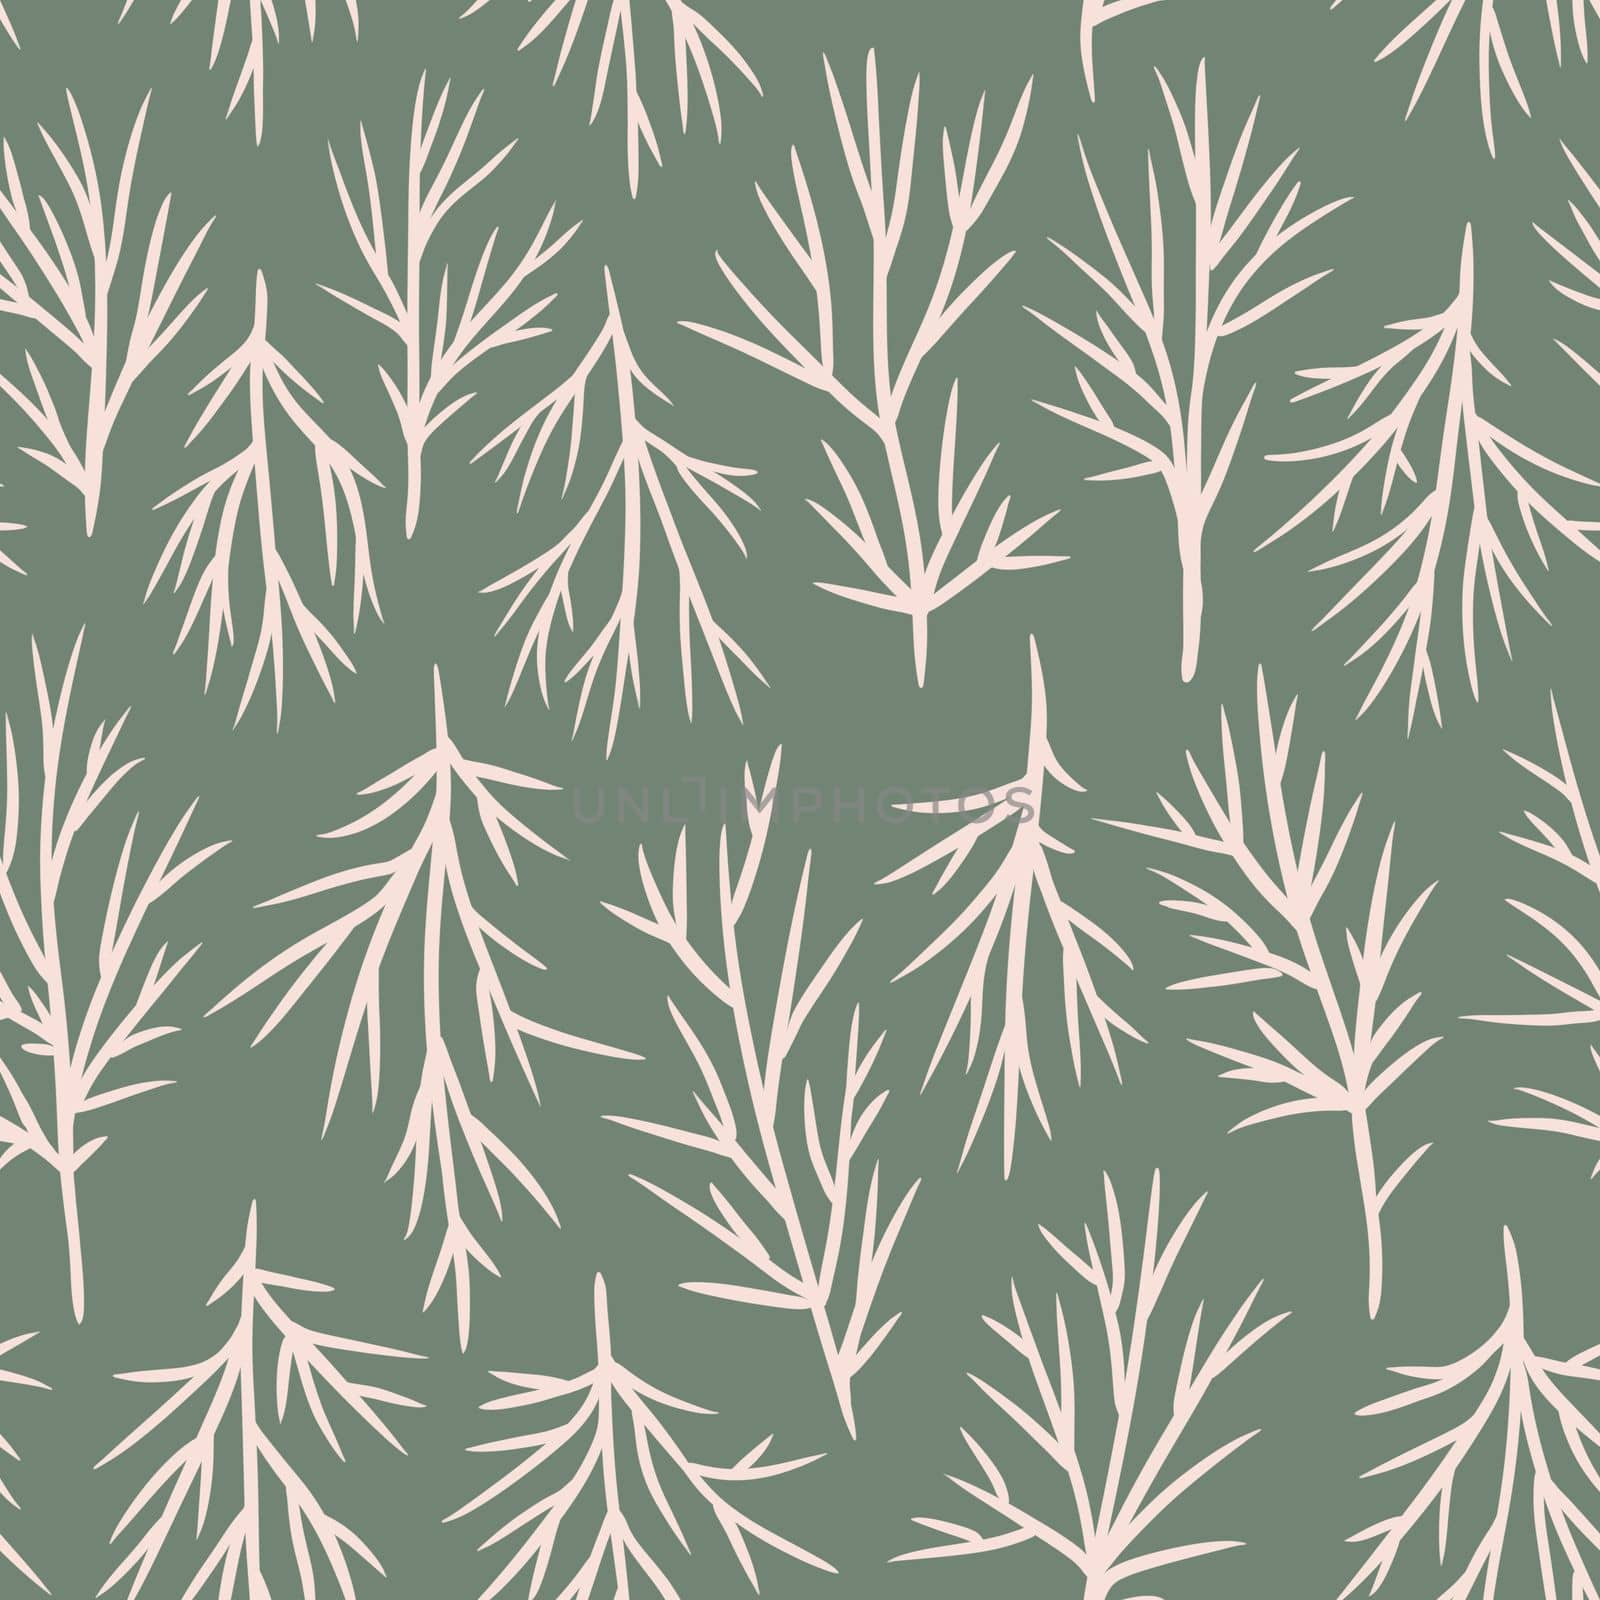 Hand drawn seamless pattern with beige cosmos leaves on sage green background. Elegant minimalist floral foliage on boho bohemian print, pastel muted neutral color, spring garden fabric, simple decoration. by Lagmar